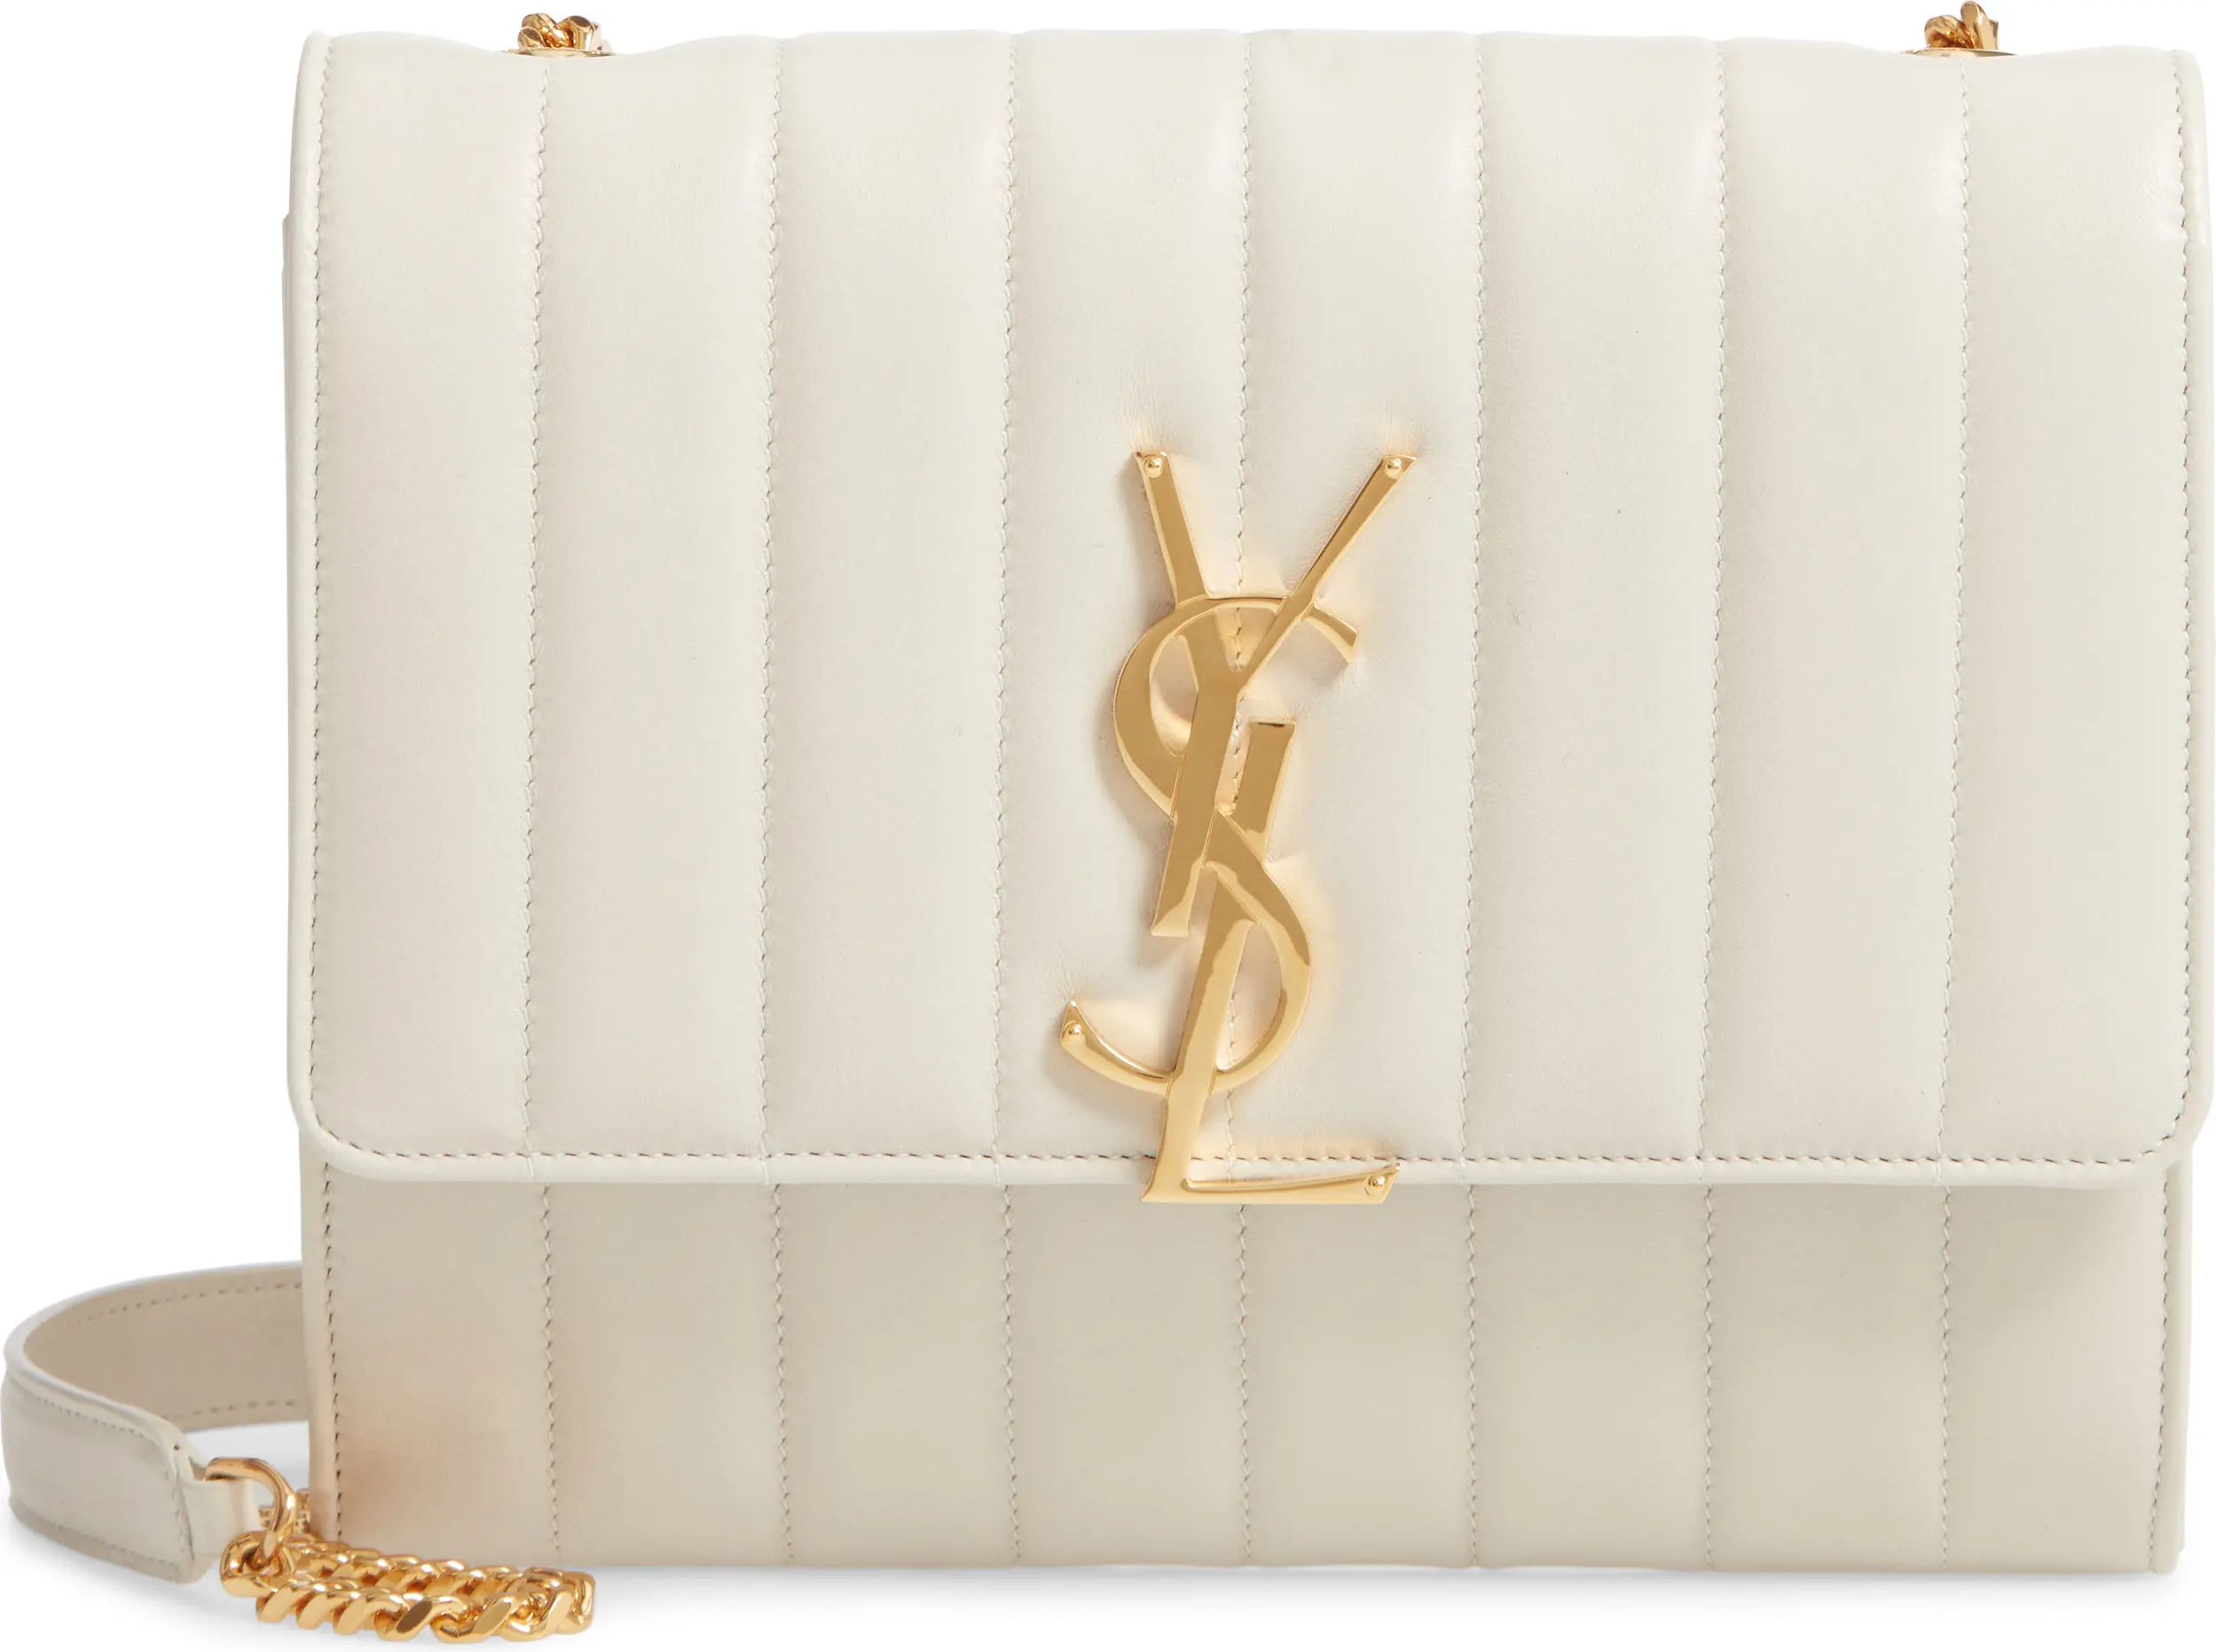 Saint Laurent Small Vicky Leather Wallet on a Chain | Nordstrom